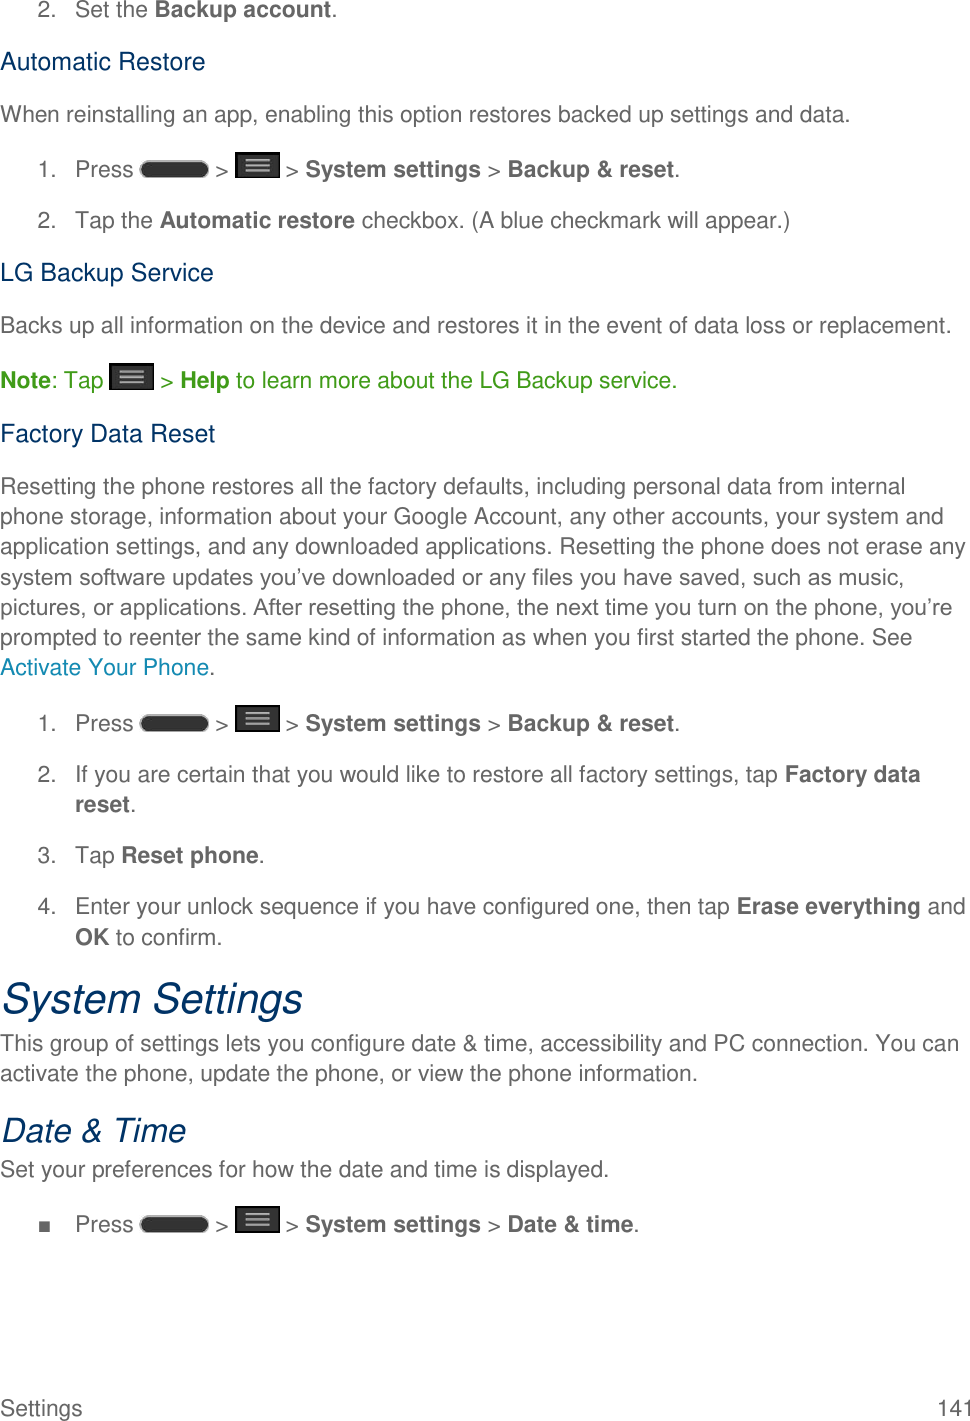 Settings  141 2.  Set the Backup account. Automatic Restore When reinstalling an app, enabling this option restores backed up settings and data. 1.  Press   &gt;   &gt; System settings &gt; Backup &amp; reset. 2.  Tap the Automatic restore checkbox. (A blue checkmark will appear.) LG Backup Service Backs up all information on the device and restores it in the event of data loss or replacement. Note: Tap   &gt; Help to learn more about the LG Backup service. Factory Data Reset Resetting the phone restores all the factory defaults, including personal data from internal phone storage, information about your Google Account, any other accounts, your system and application settings, and any downloaded applications. Resetting the phone does not erase any system software updates you‘ve downloaded or any files you have saved, such as music, pictures, or applications. After resetting the phone, the next time you turn on the phone, you‘re prompted to reenter the same kind of information as when you first started the phone. See Activate Your Phone. 1.  Press   &gt;   &gt; System settings &gt; Backup &amp; reset. 2.  If you are certain that you would like to restore all factory settings, tap Factory data reset. 3.  Tap Reset phone. 4.  Enter your unlock sequence if you have configured one, then tap Erase everything and OK to confirm. System Settings This group of settings lets you configure date &amp; time, accessibility and PC connection. You can activate the phone, update the phone, or view the phone information. Date &amp; Time Set your preferences for how the date and time is displayed.  ■  Press   &gt;   &gt; System settings &gt; Date &amp; time. 